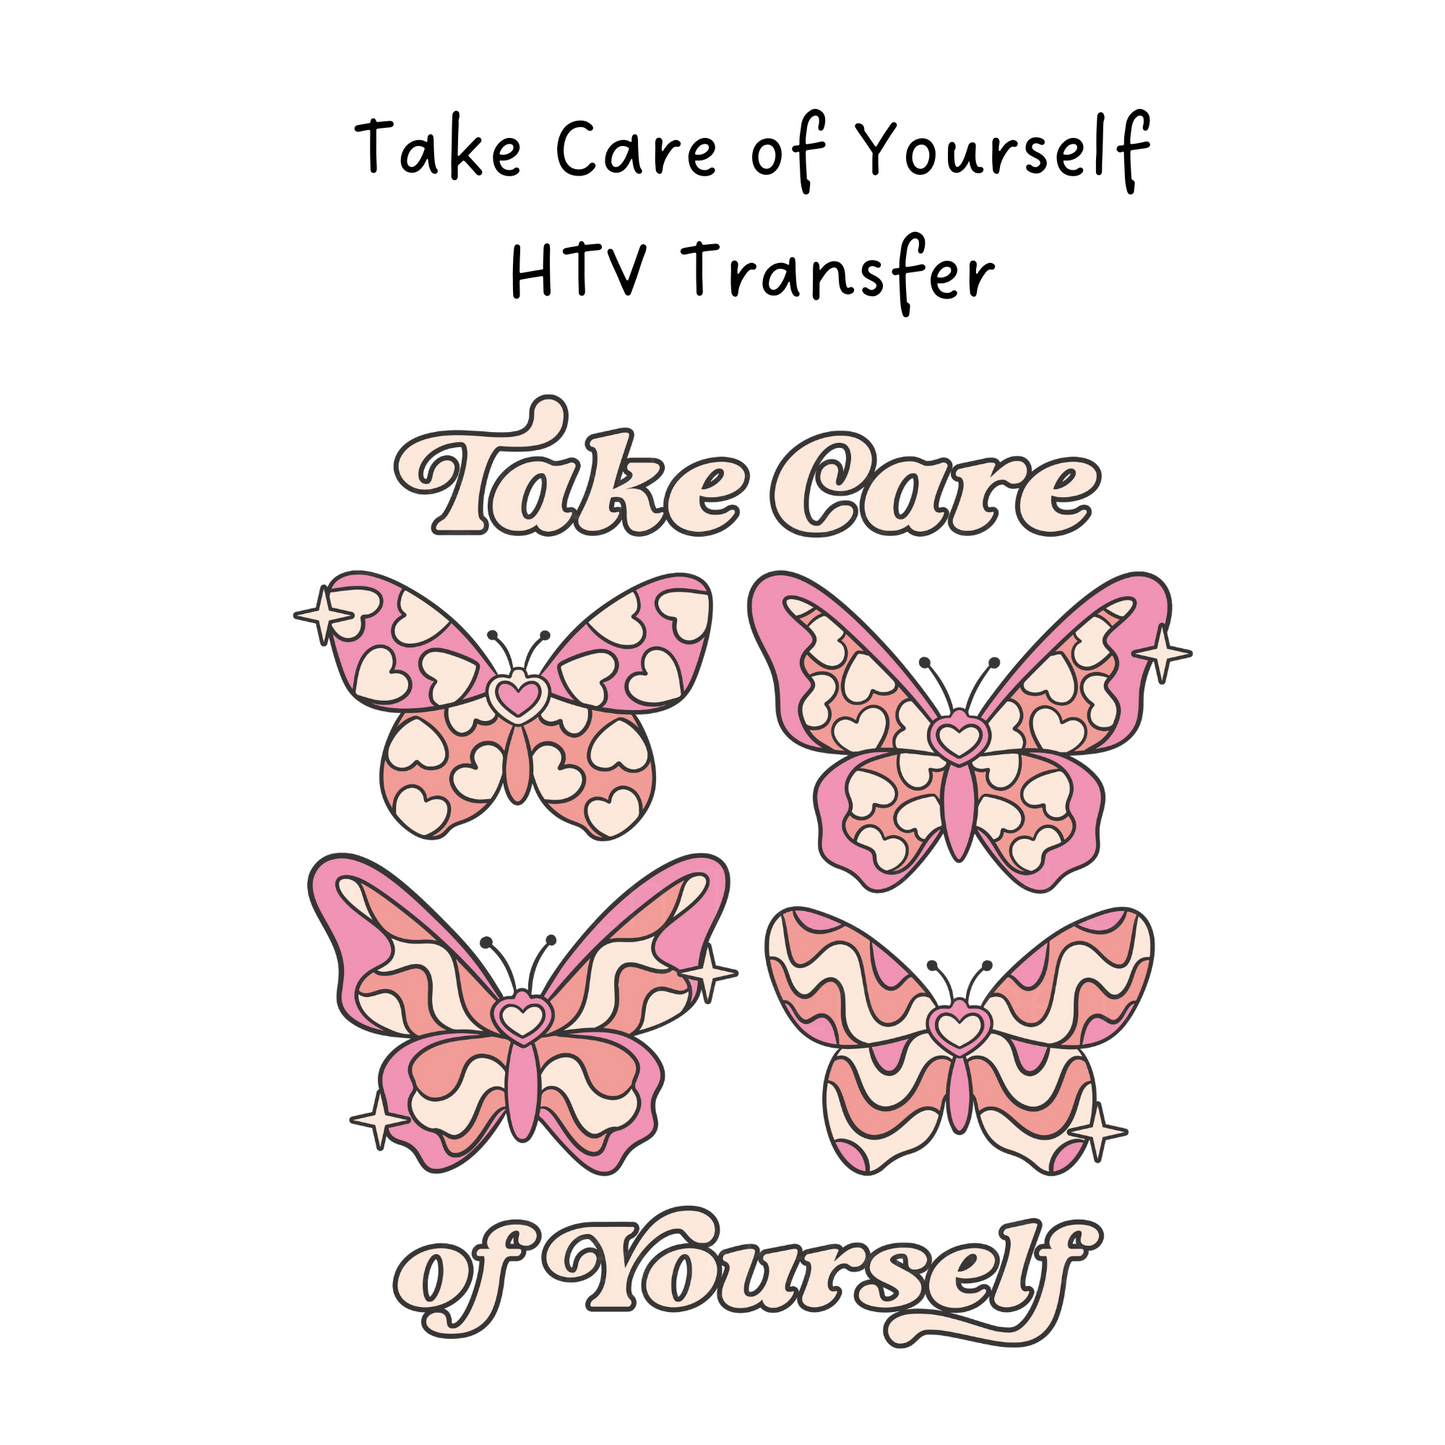 Take Care Of Yourself HTV Transfer